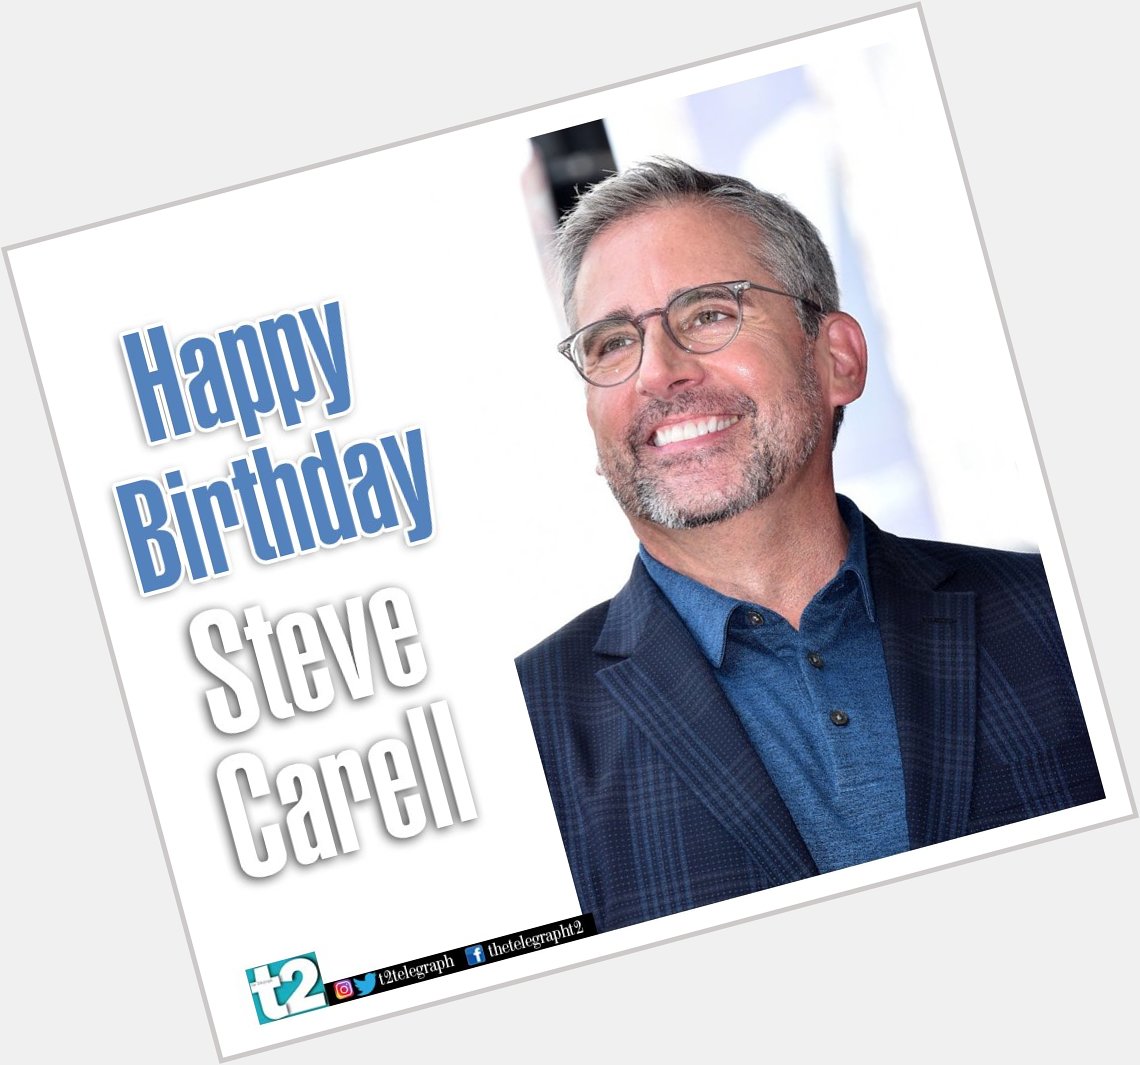 He teases the tear ducts as easily as he brings on the laughs. Happy birthday Steve Carell! 